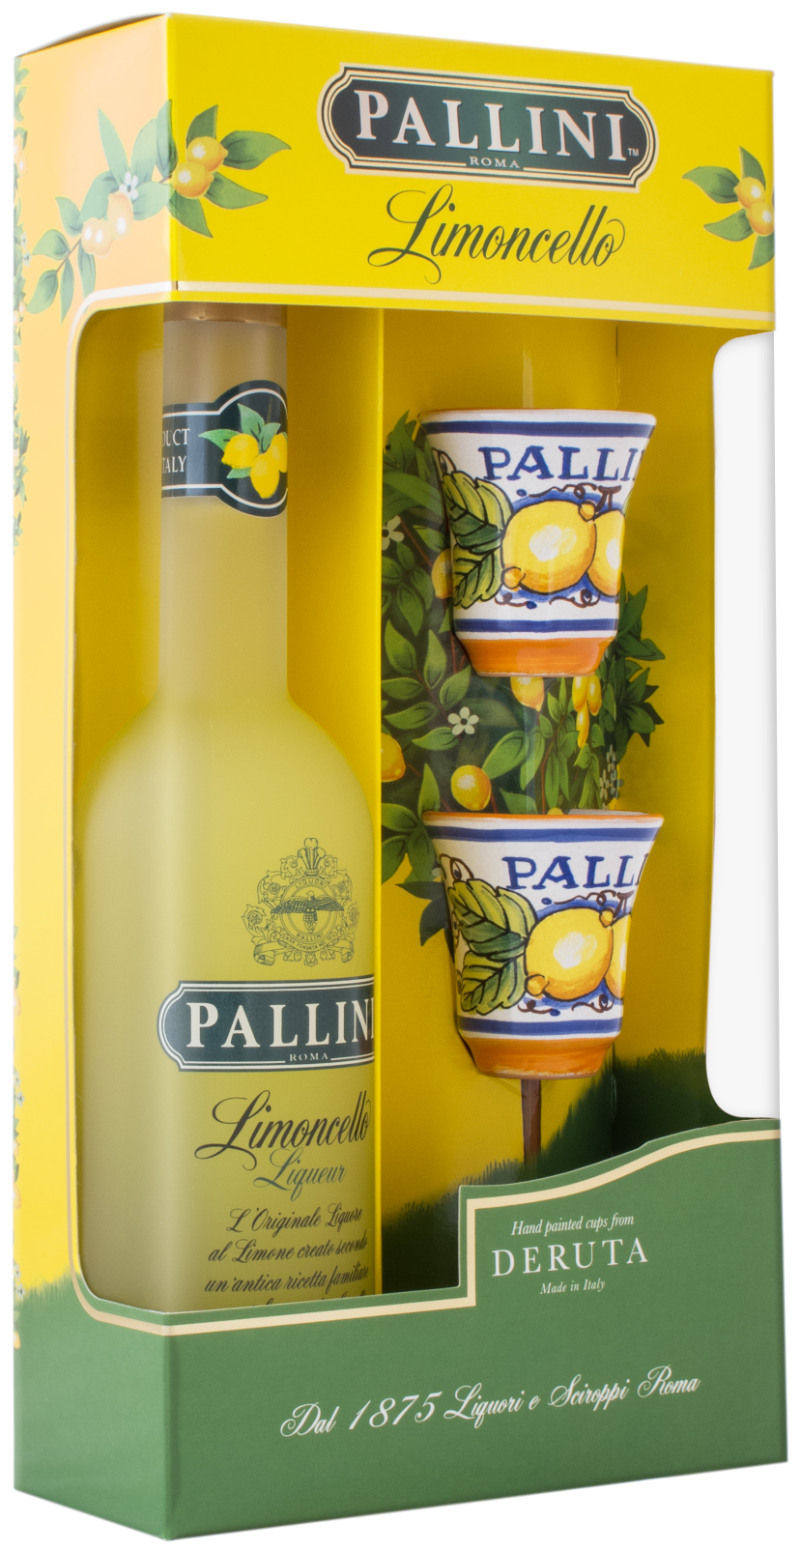 Pallini - Limoncello Giftpack 50 cl 26% vol